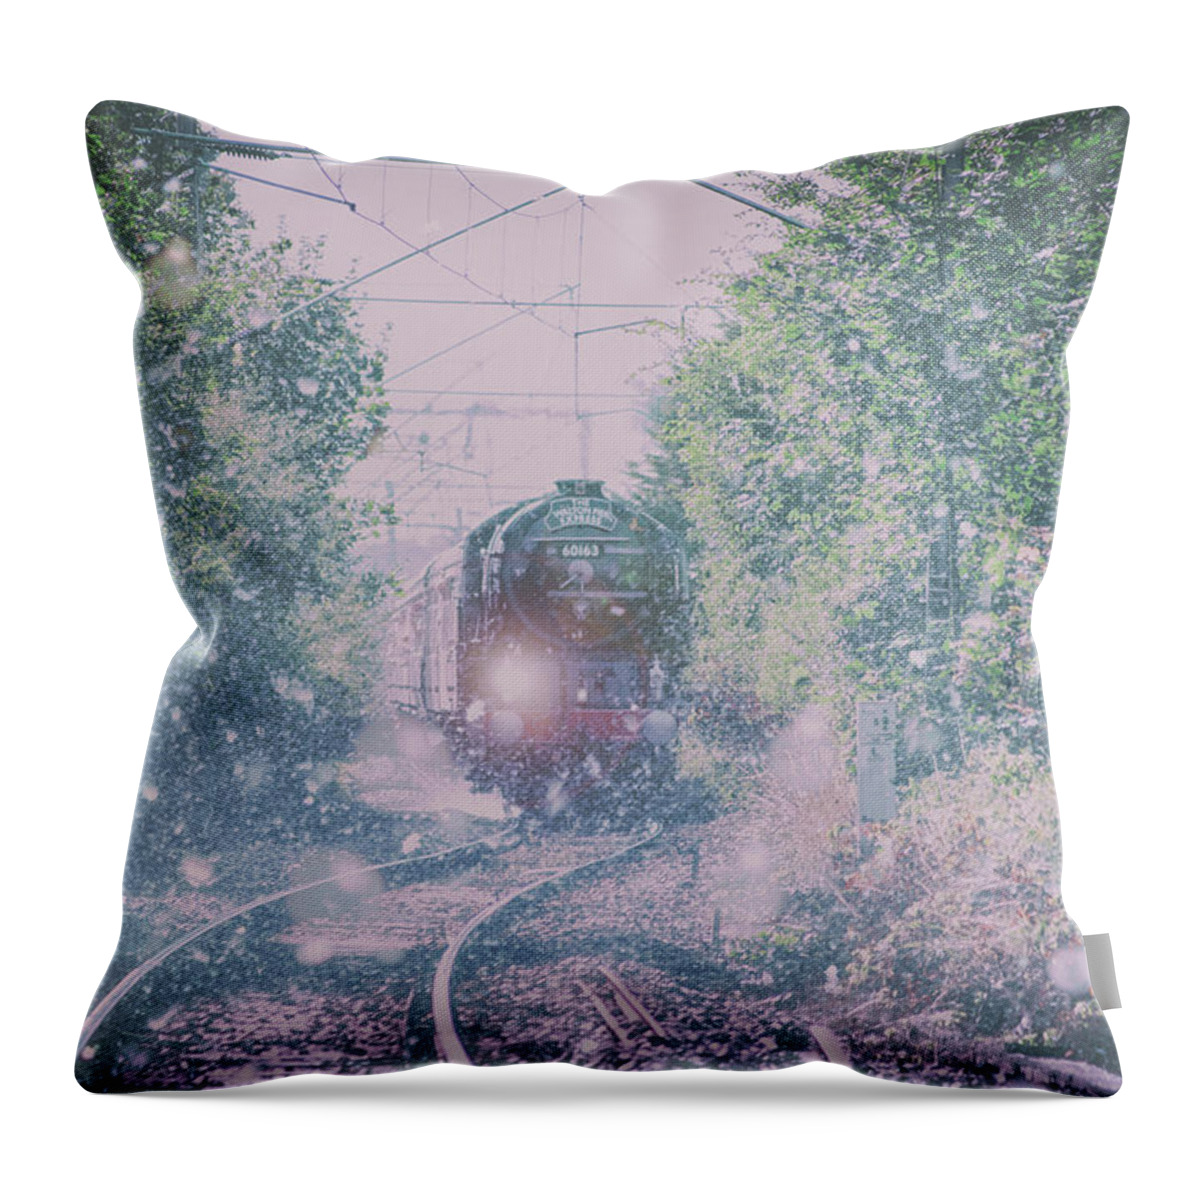 Snow Throw Pillow featuring the photograph Through the Blizzard by Martin Newman